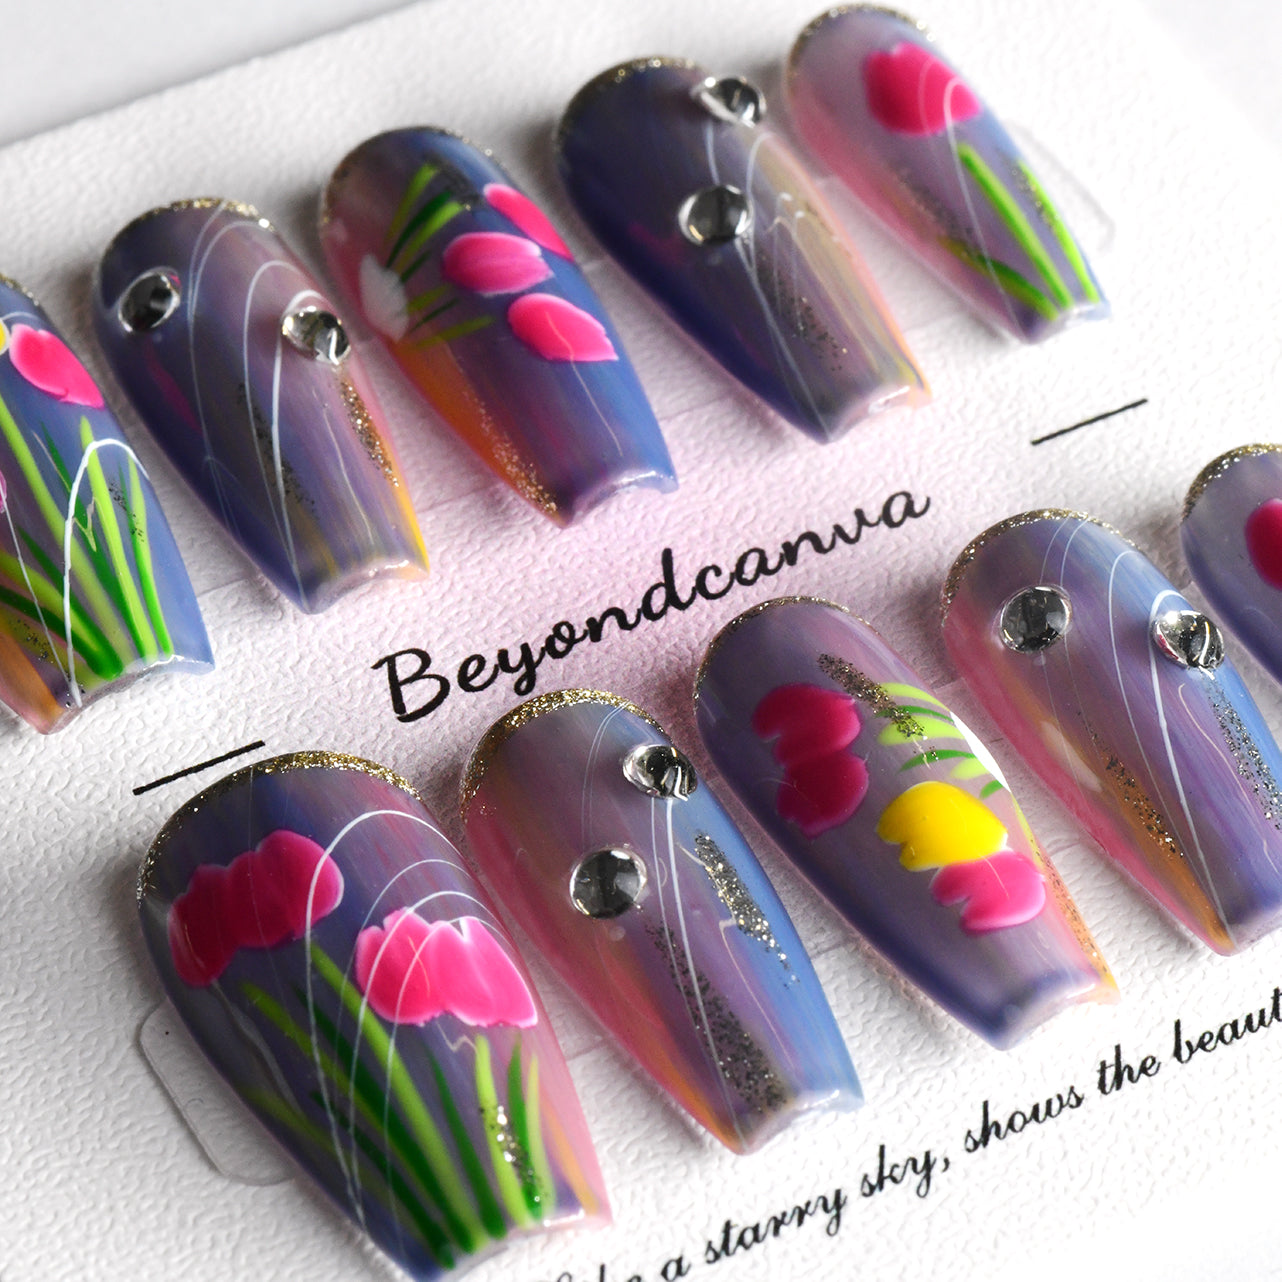 Exquisite Multi-Color Acrylic Long Coffin Glossy Handmade Press On Nails BEYONDCANVA